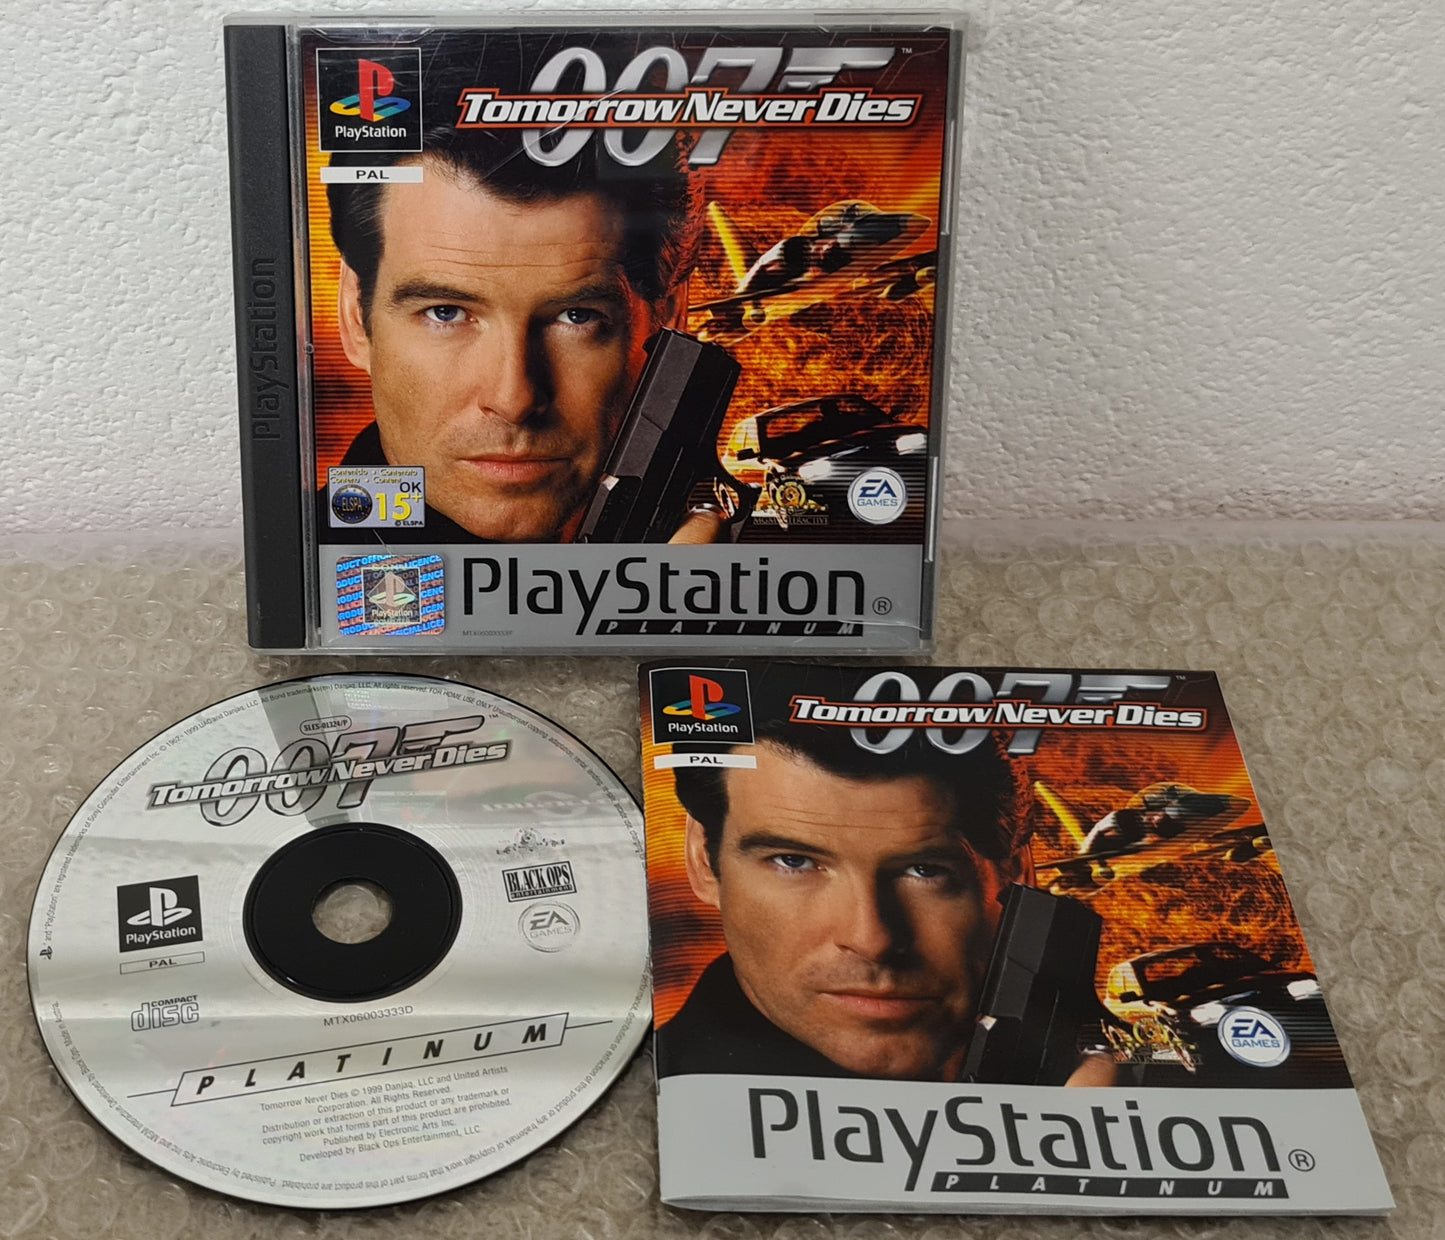 Tomorrow Never Dies Sony Playstation 1 (PS1) Game